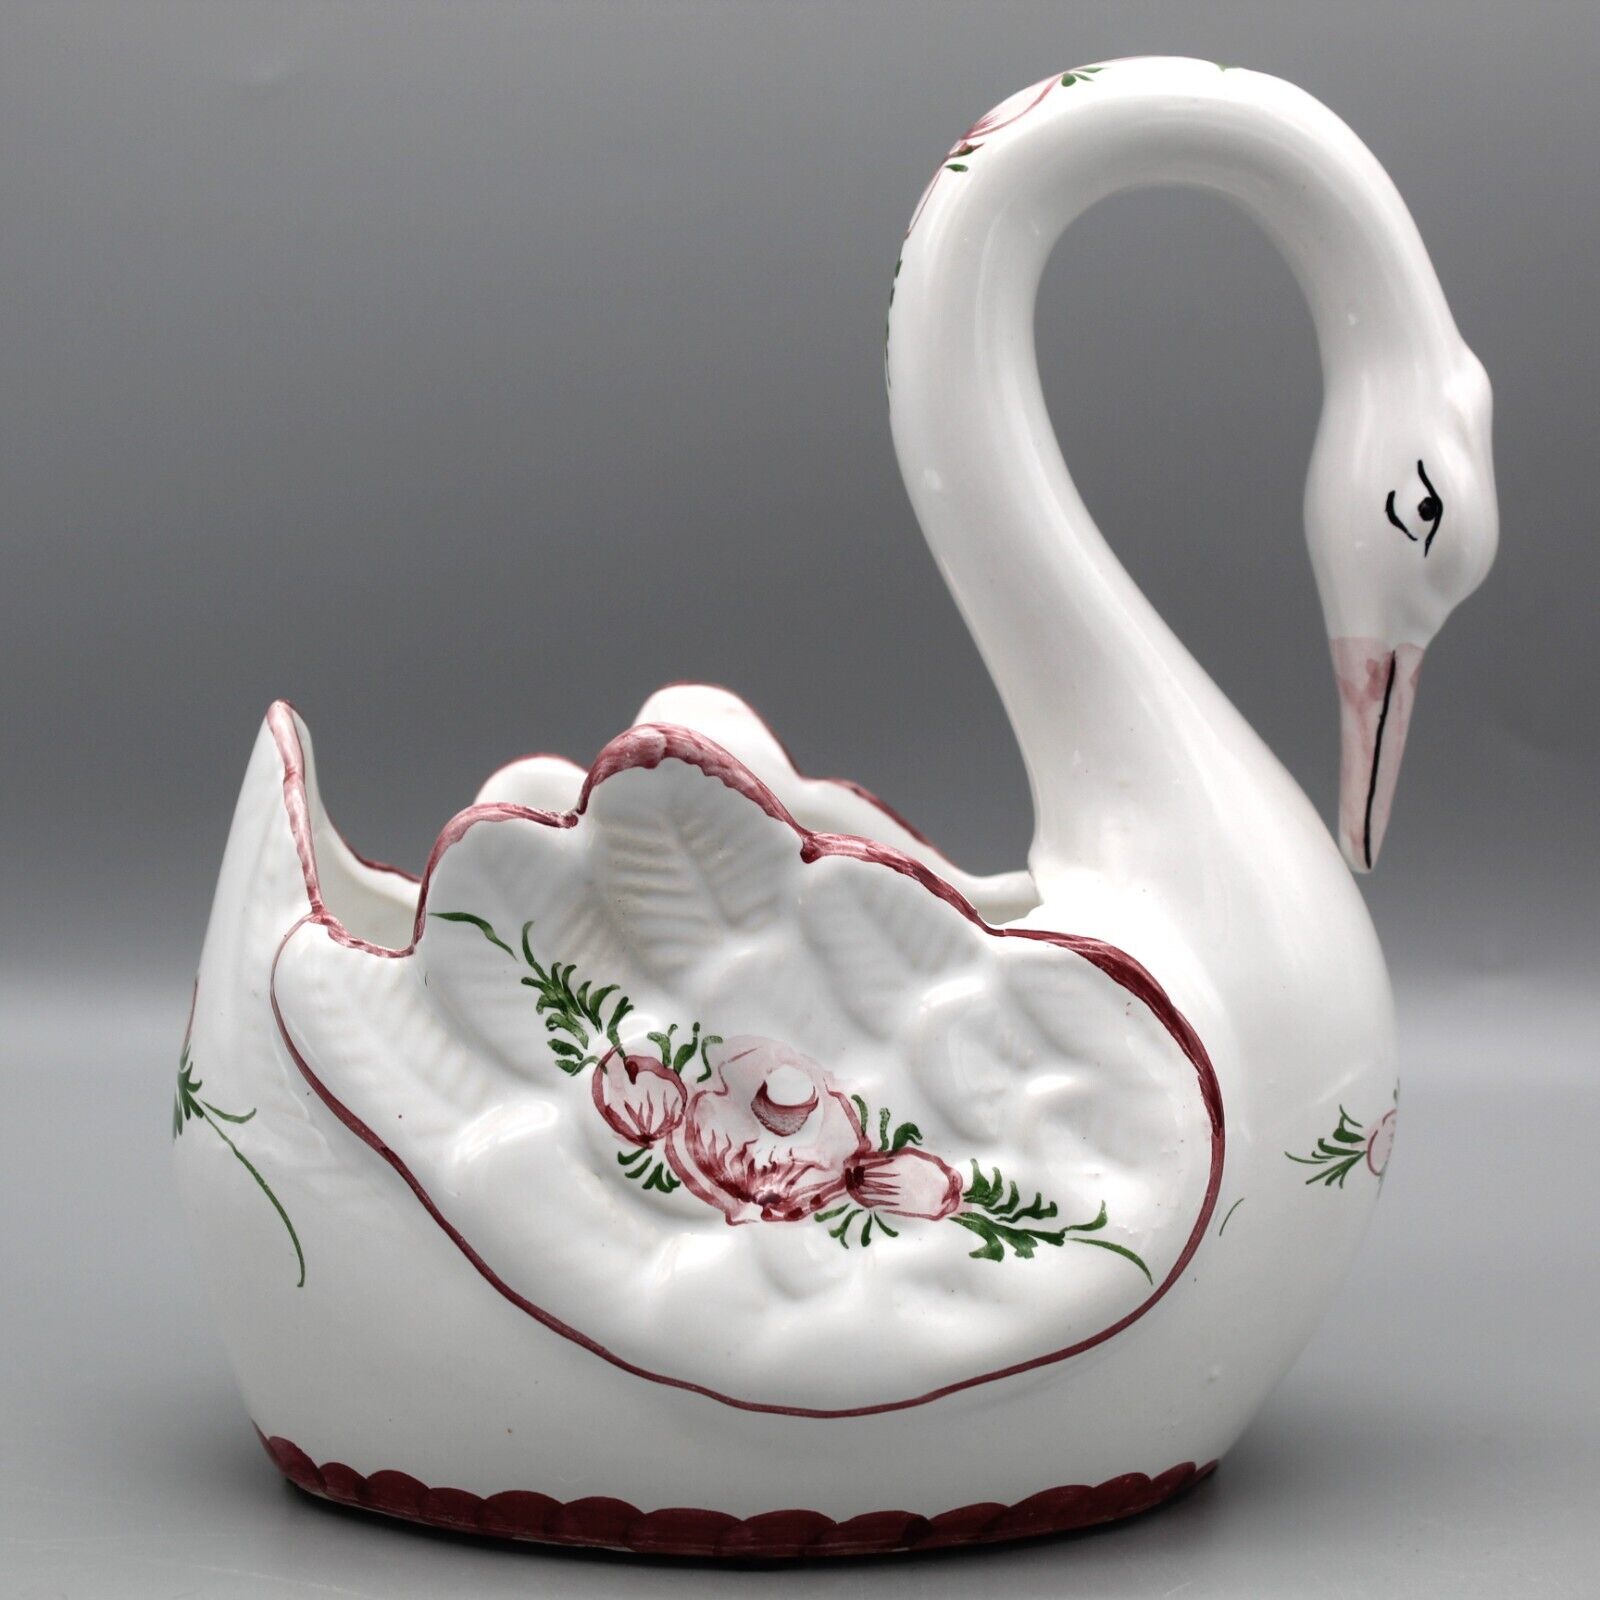 Portugal Pottery Swan Planter Candy Dish Trinket Hand Painted Pink Flower Floral